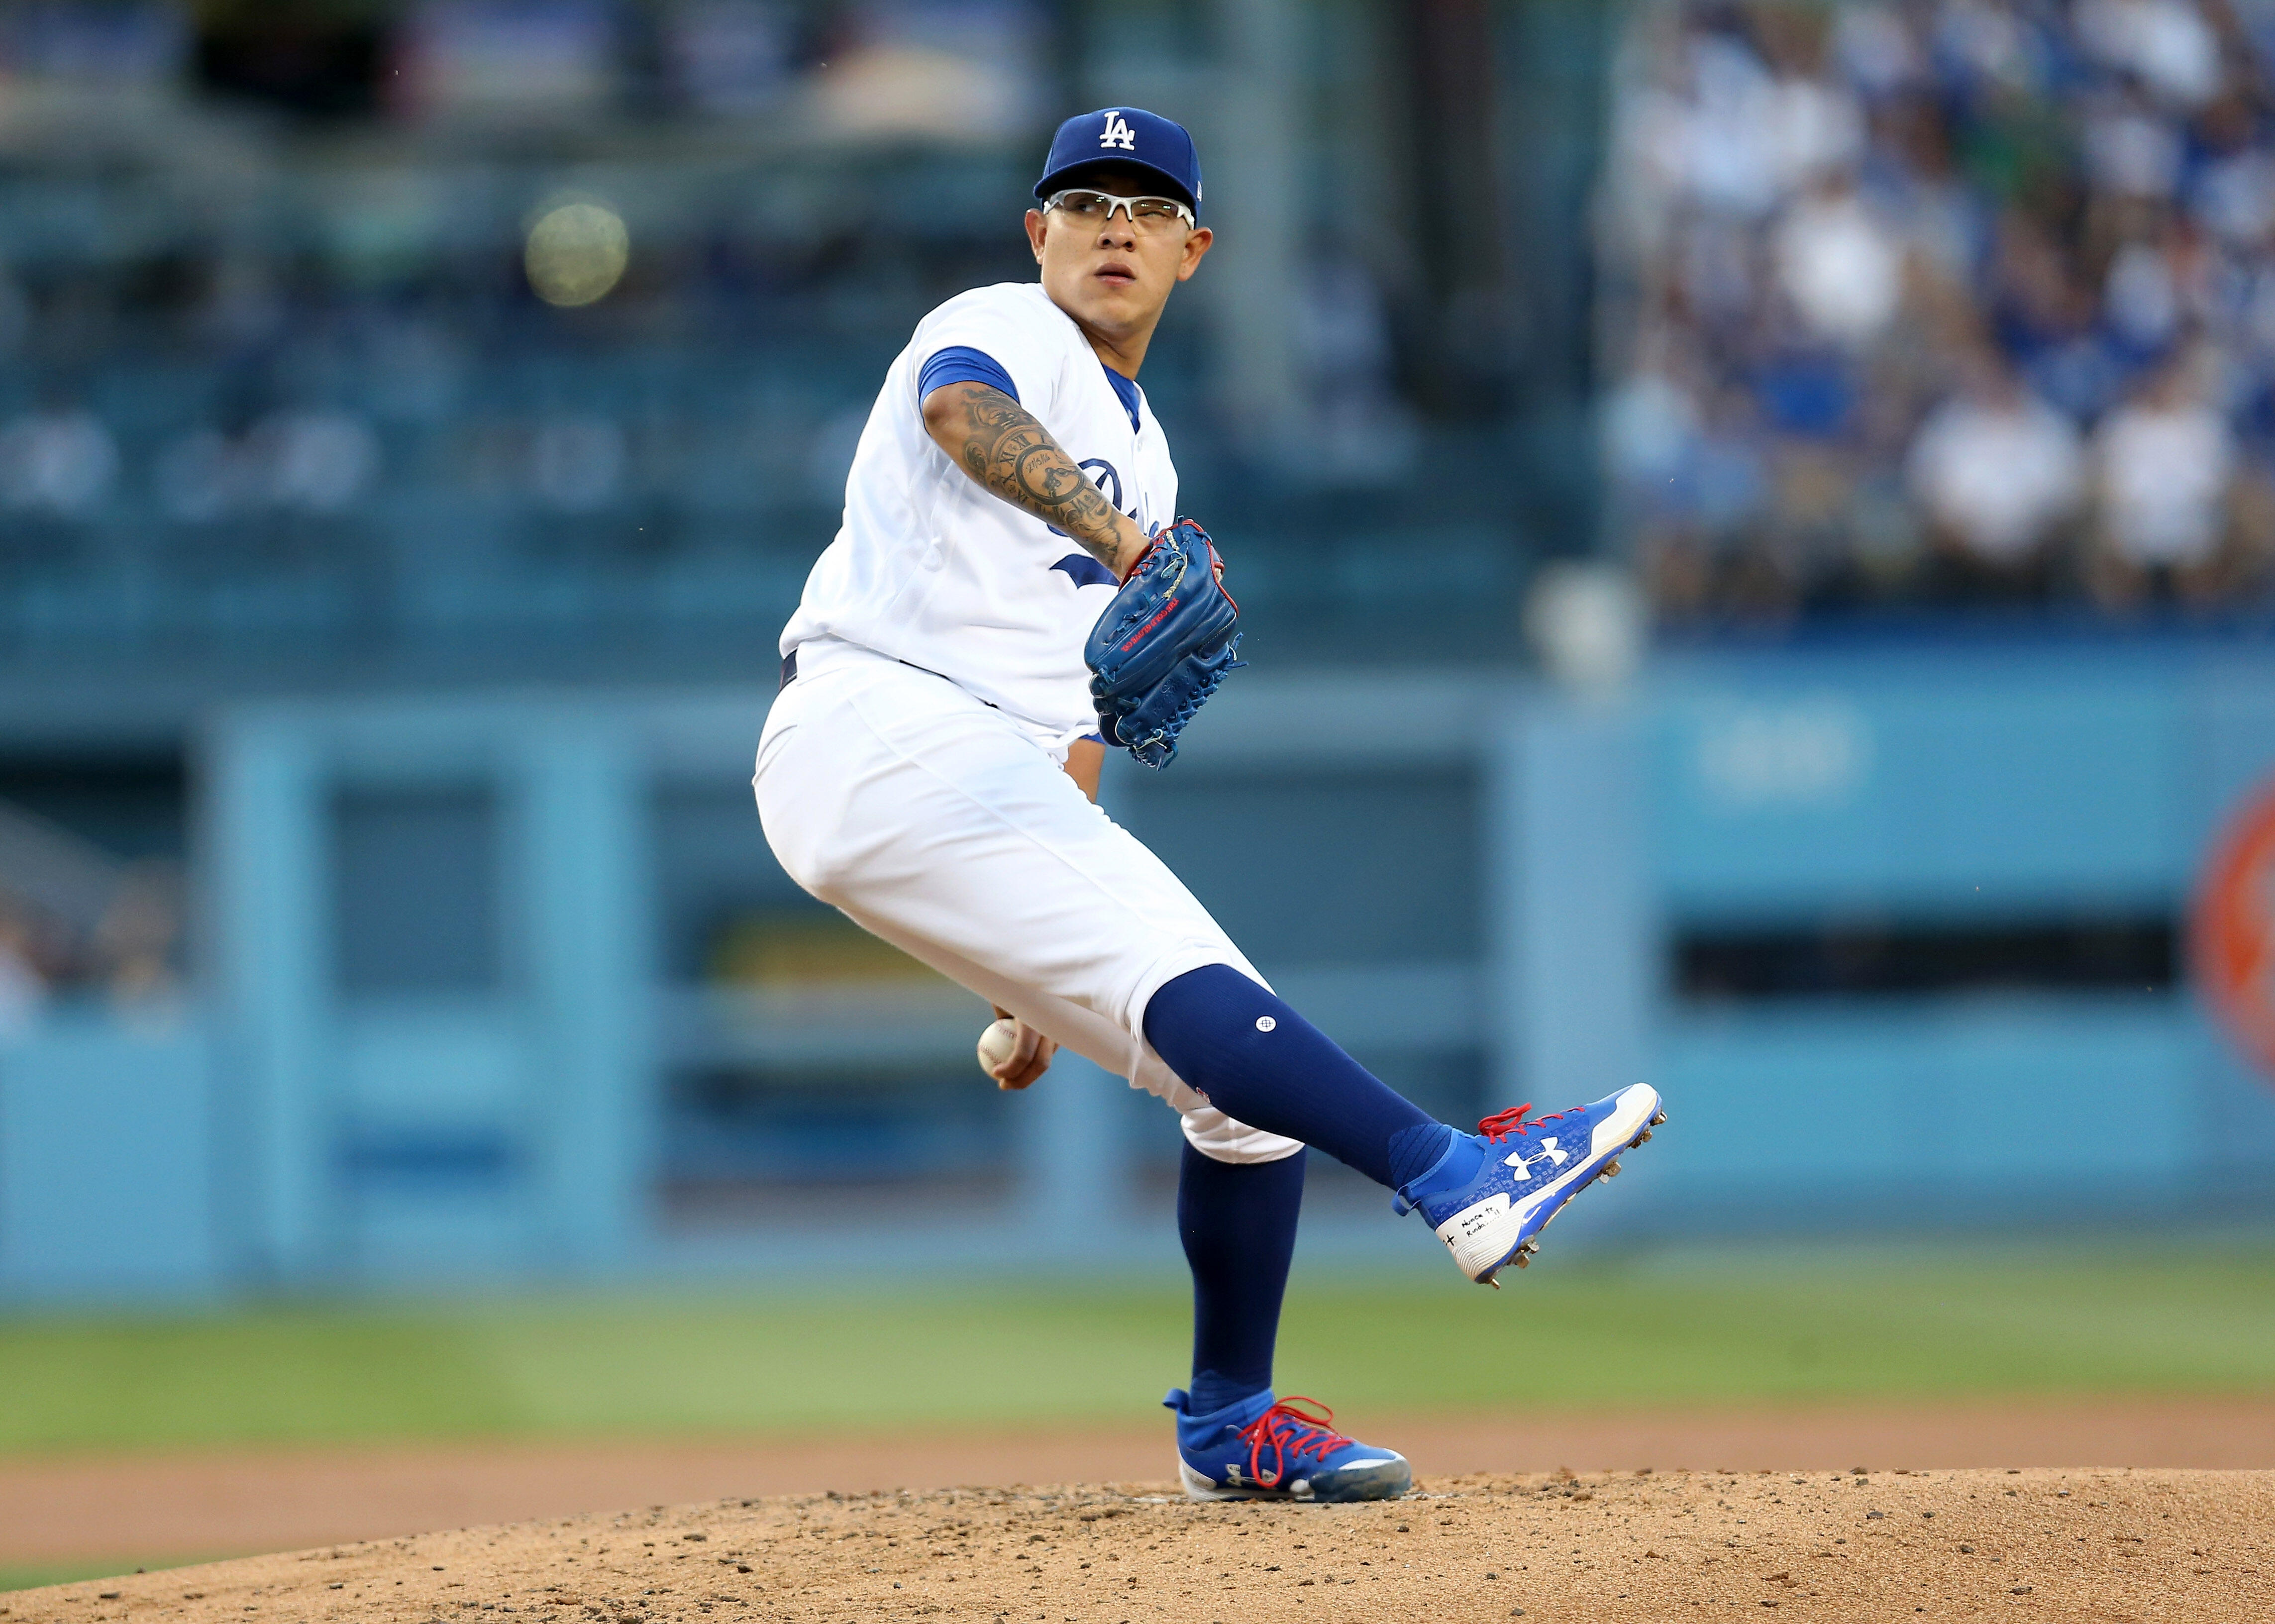 LOS ANGELES, CA - MAY 20:  Julio Urias #7 of the Los Angeles Dodgers throws  pitch in the second inning against the Miami Marlins at Dodger Stadium on May 20, 2017 in Los Angeles, California.  (Photo by Stephen Dunn/Getty Images)